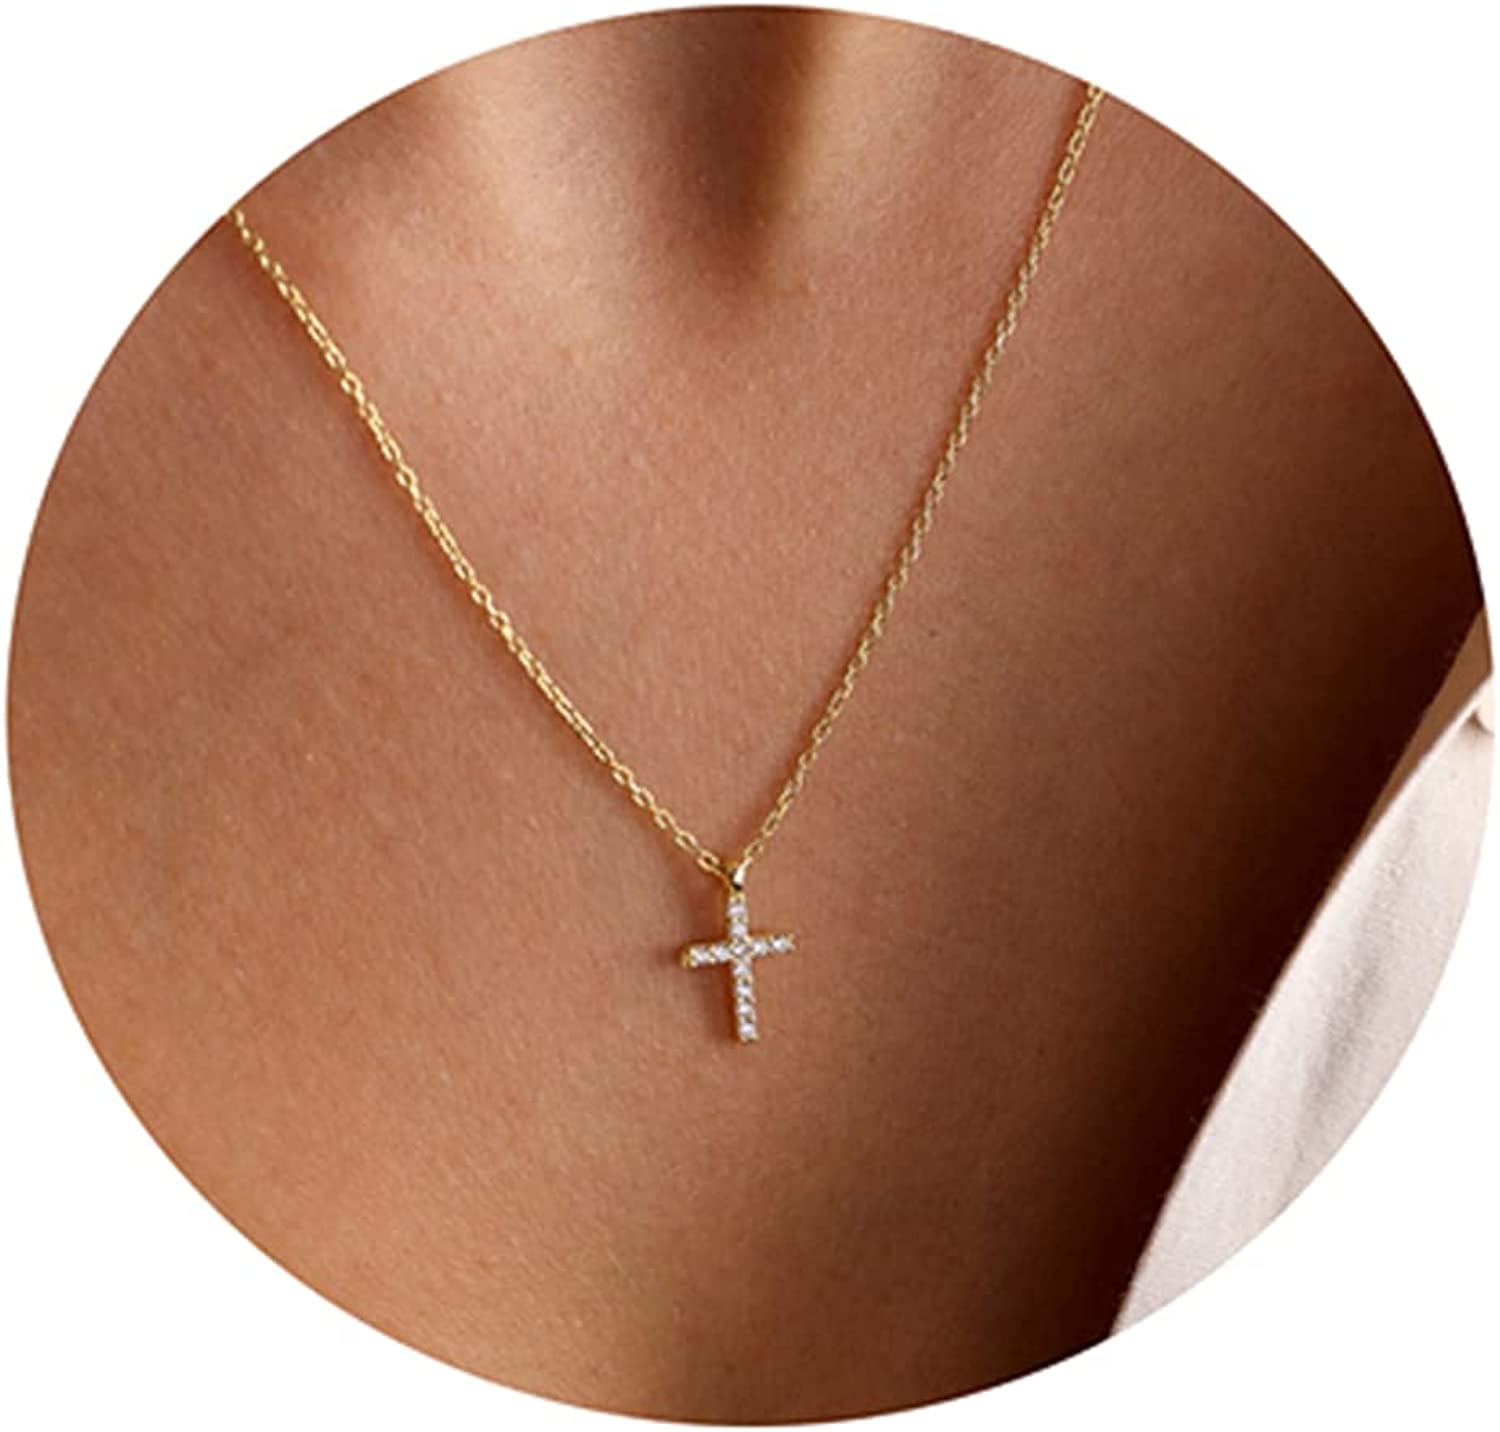 Girls Lab Created White Cubic Zirconia 14K Gold Cross Pendant Necklace -  JCPenney